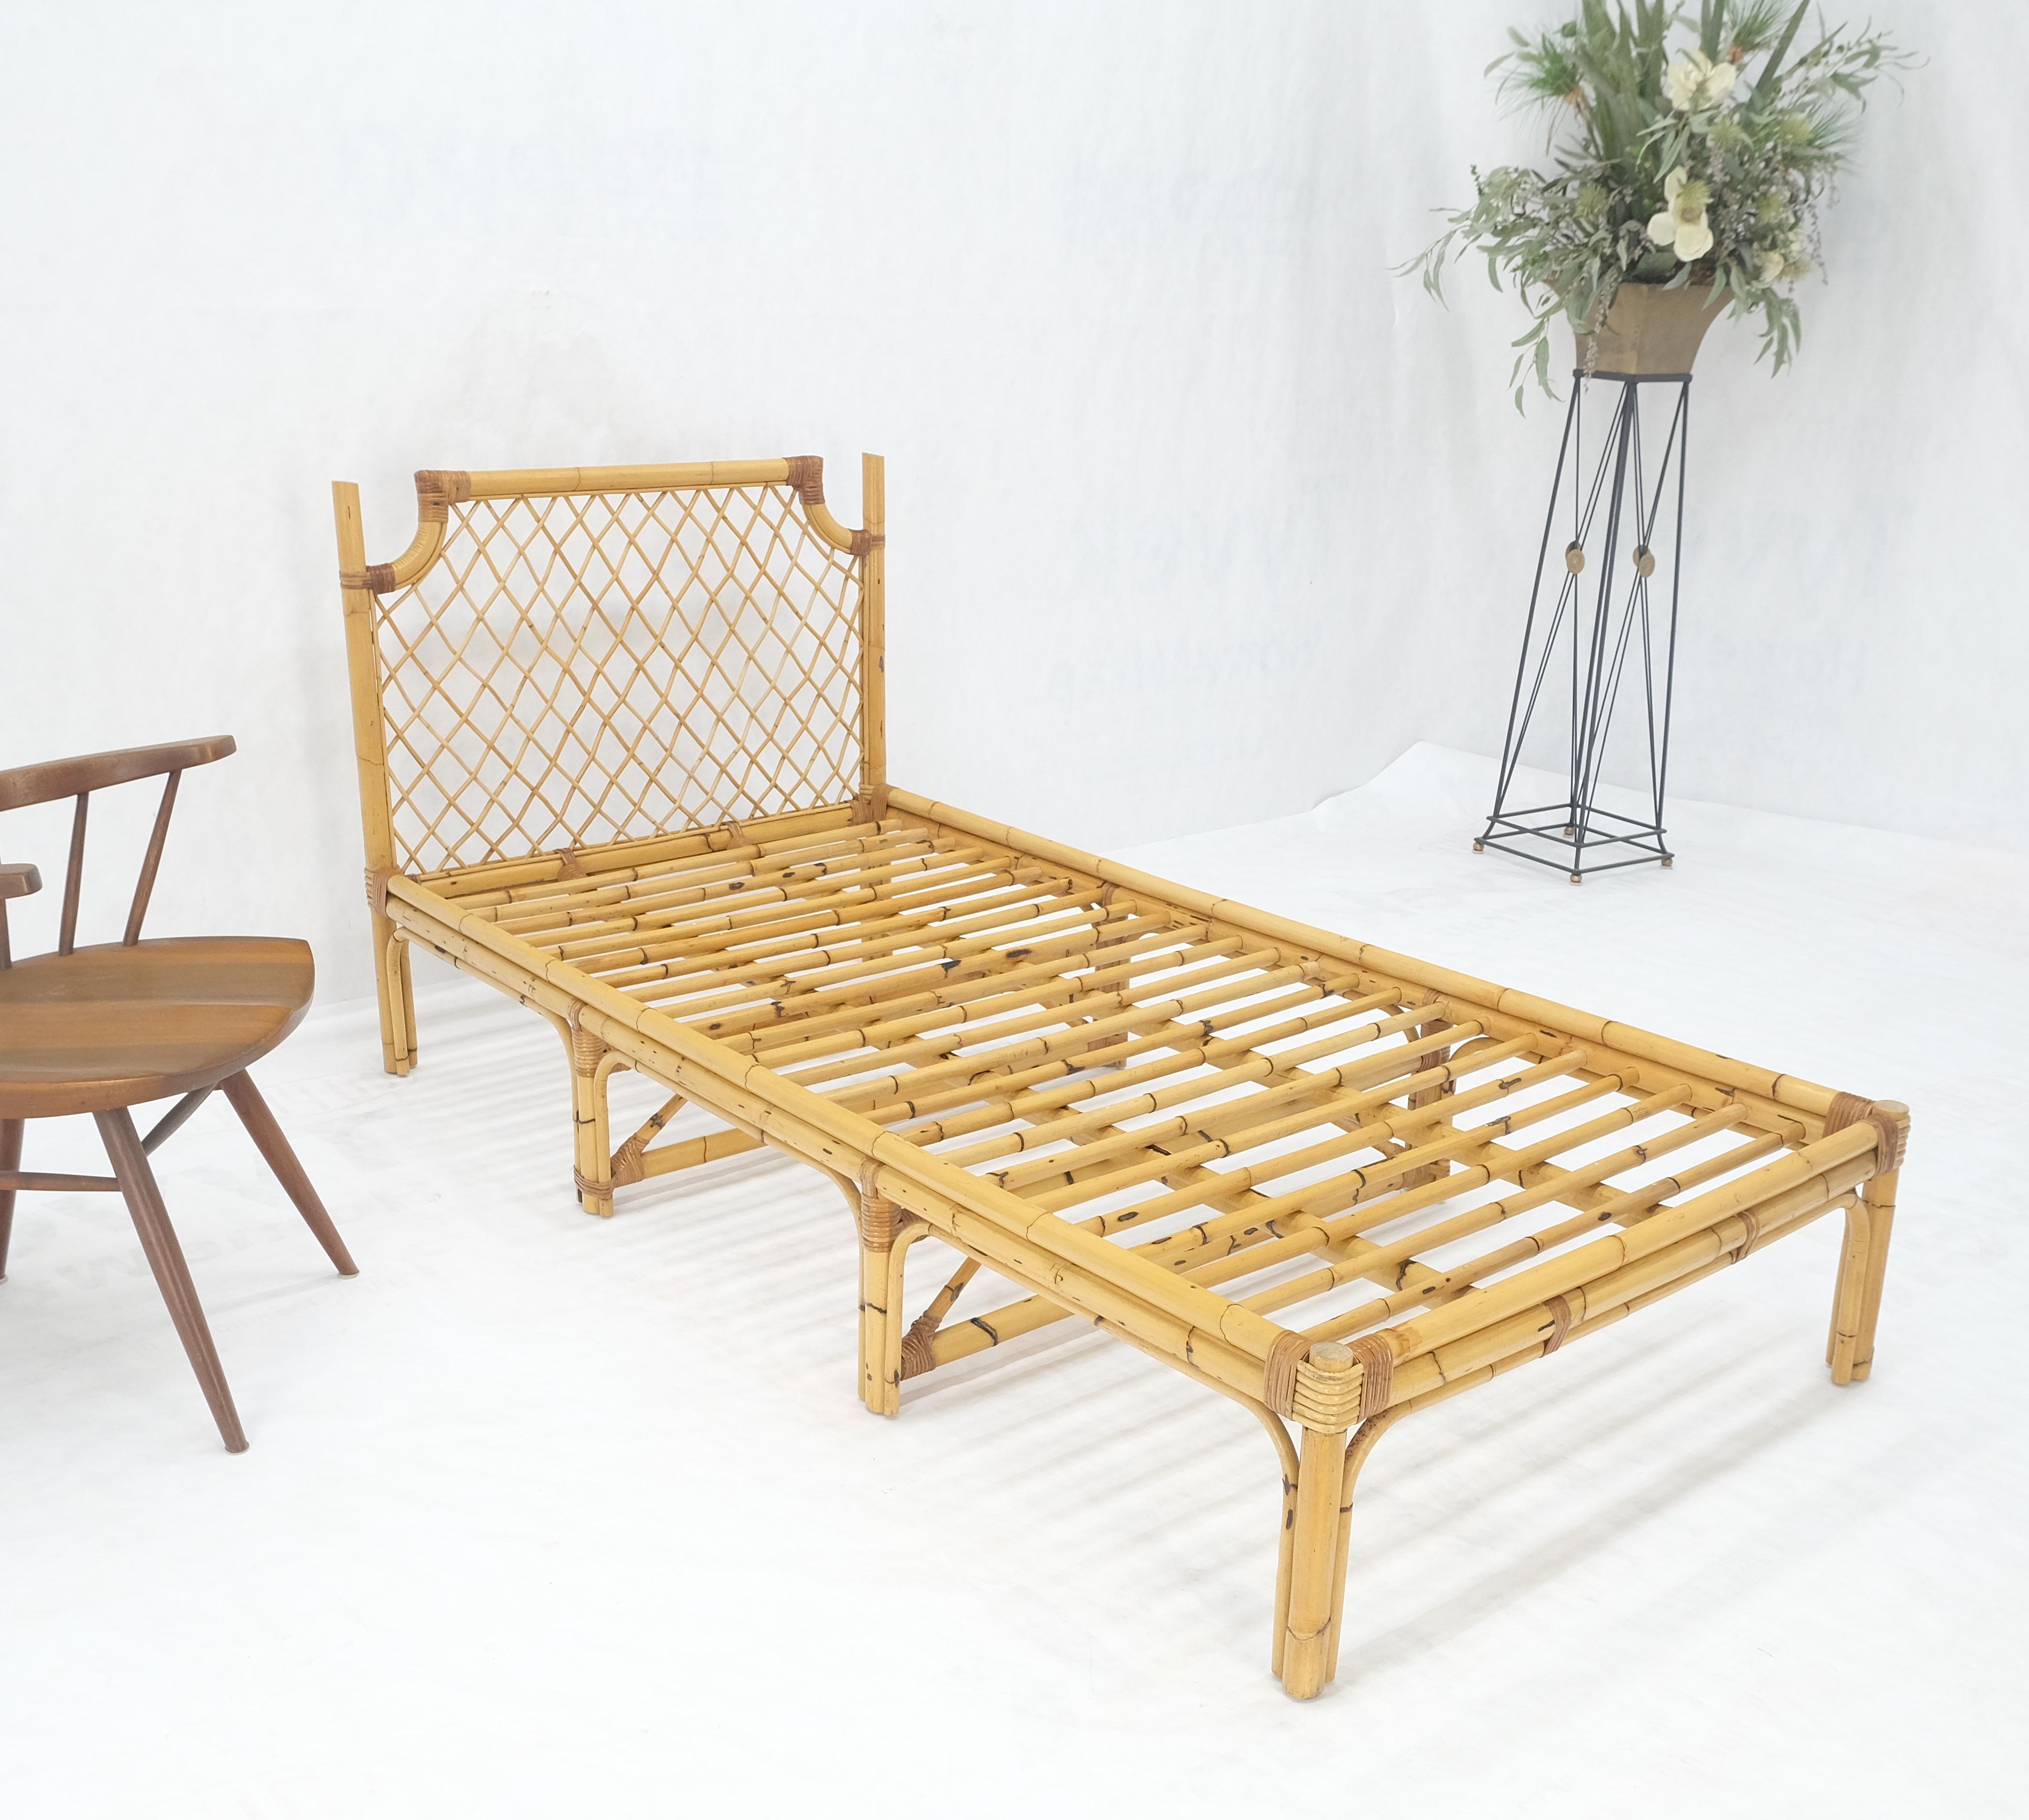 Vintage 1970s Large Bamboo Chaise Lounge Daybed Frame MINT! im Angebot 2